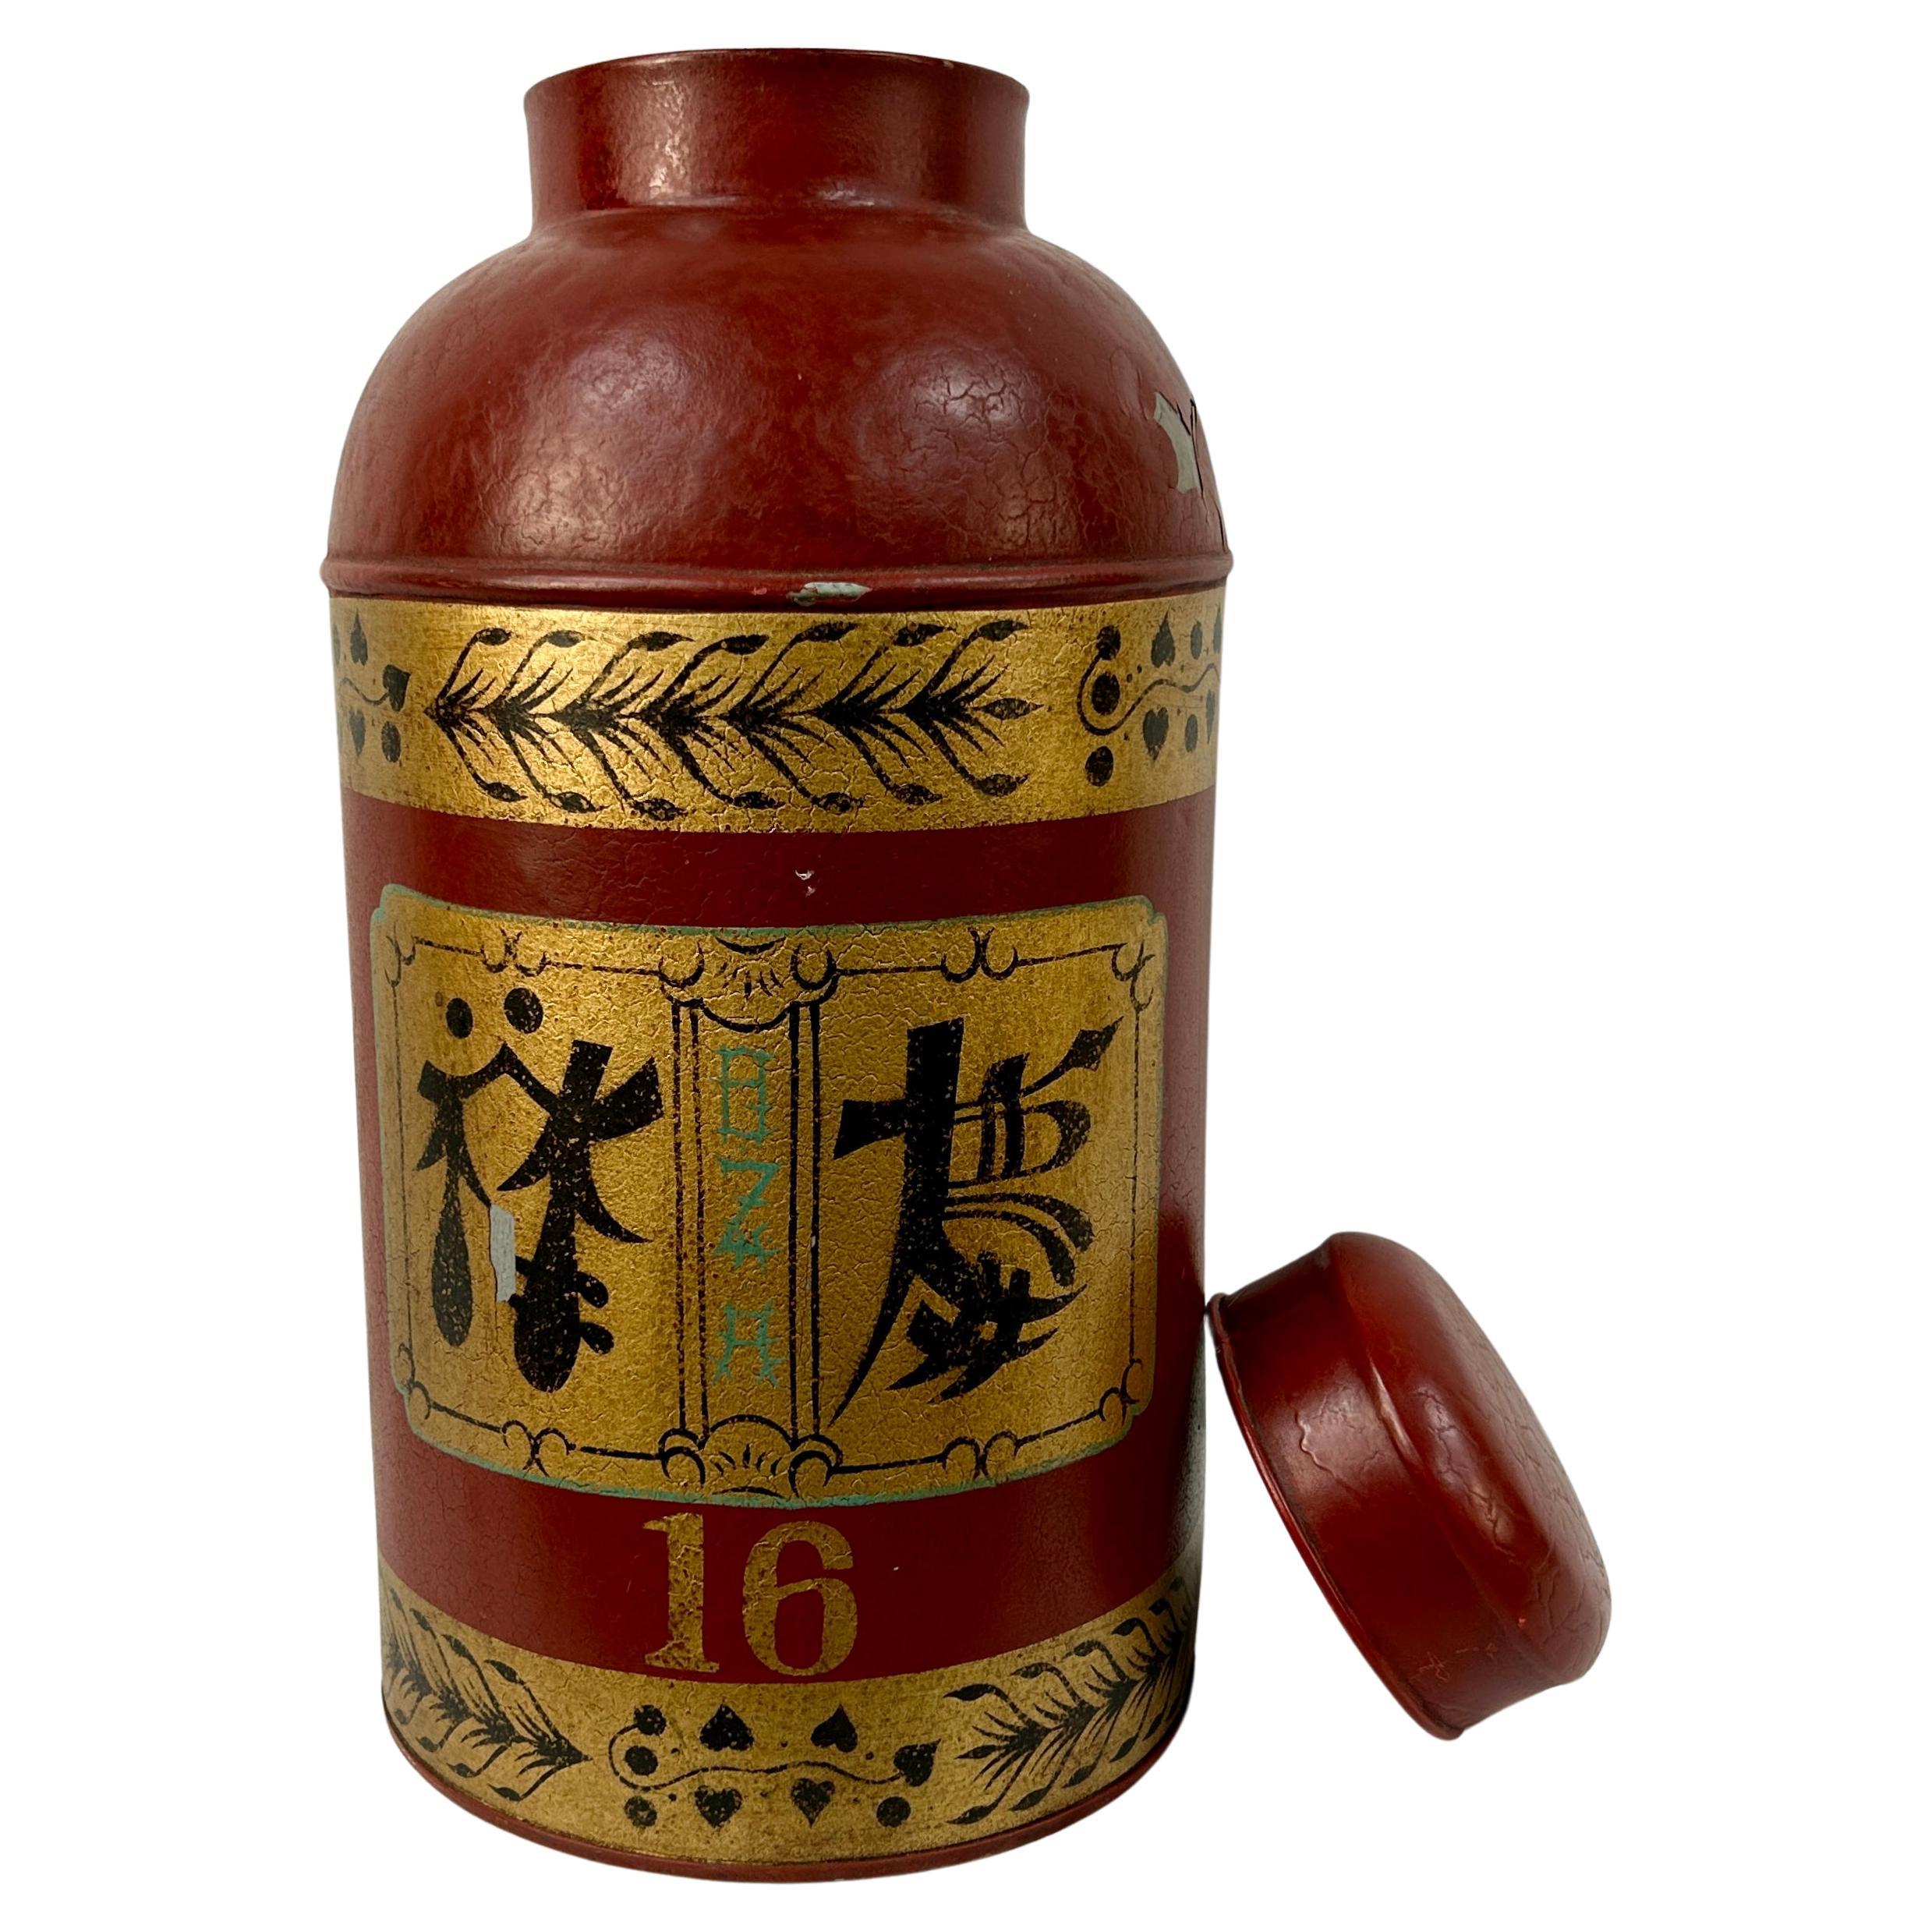 Late 20th Century Chinese Export toleware tea cannister with lid. This tea tin features Chinese characters and is hand painted gold, black and green on a red background. Can be used as a decorative piece or made into a stunning lamp.